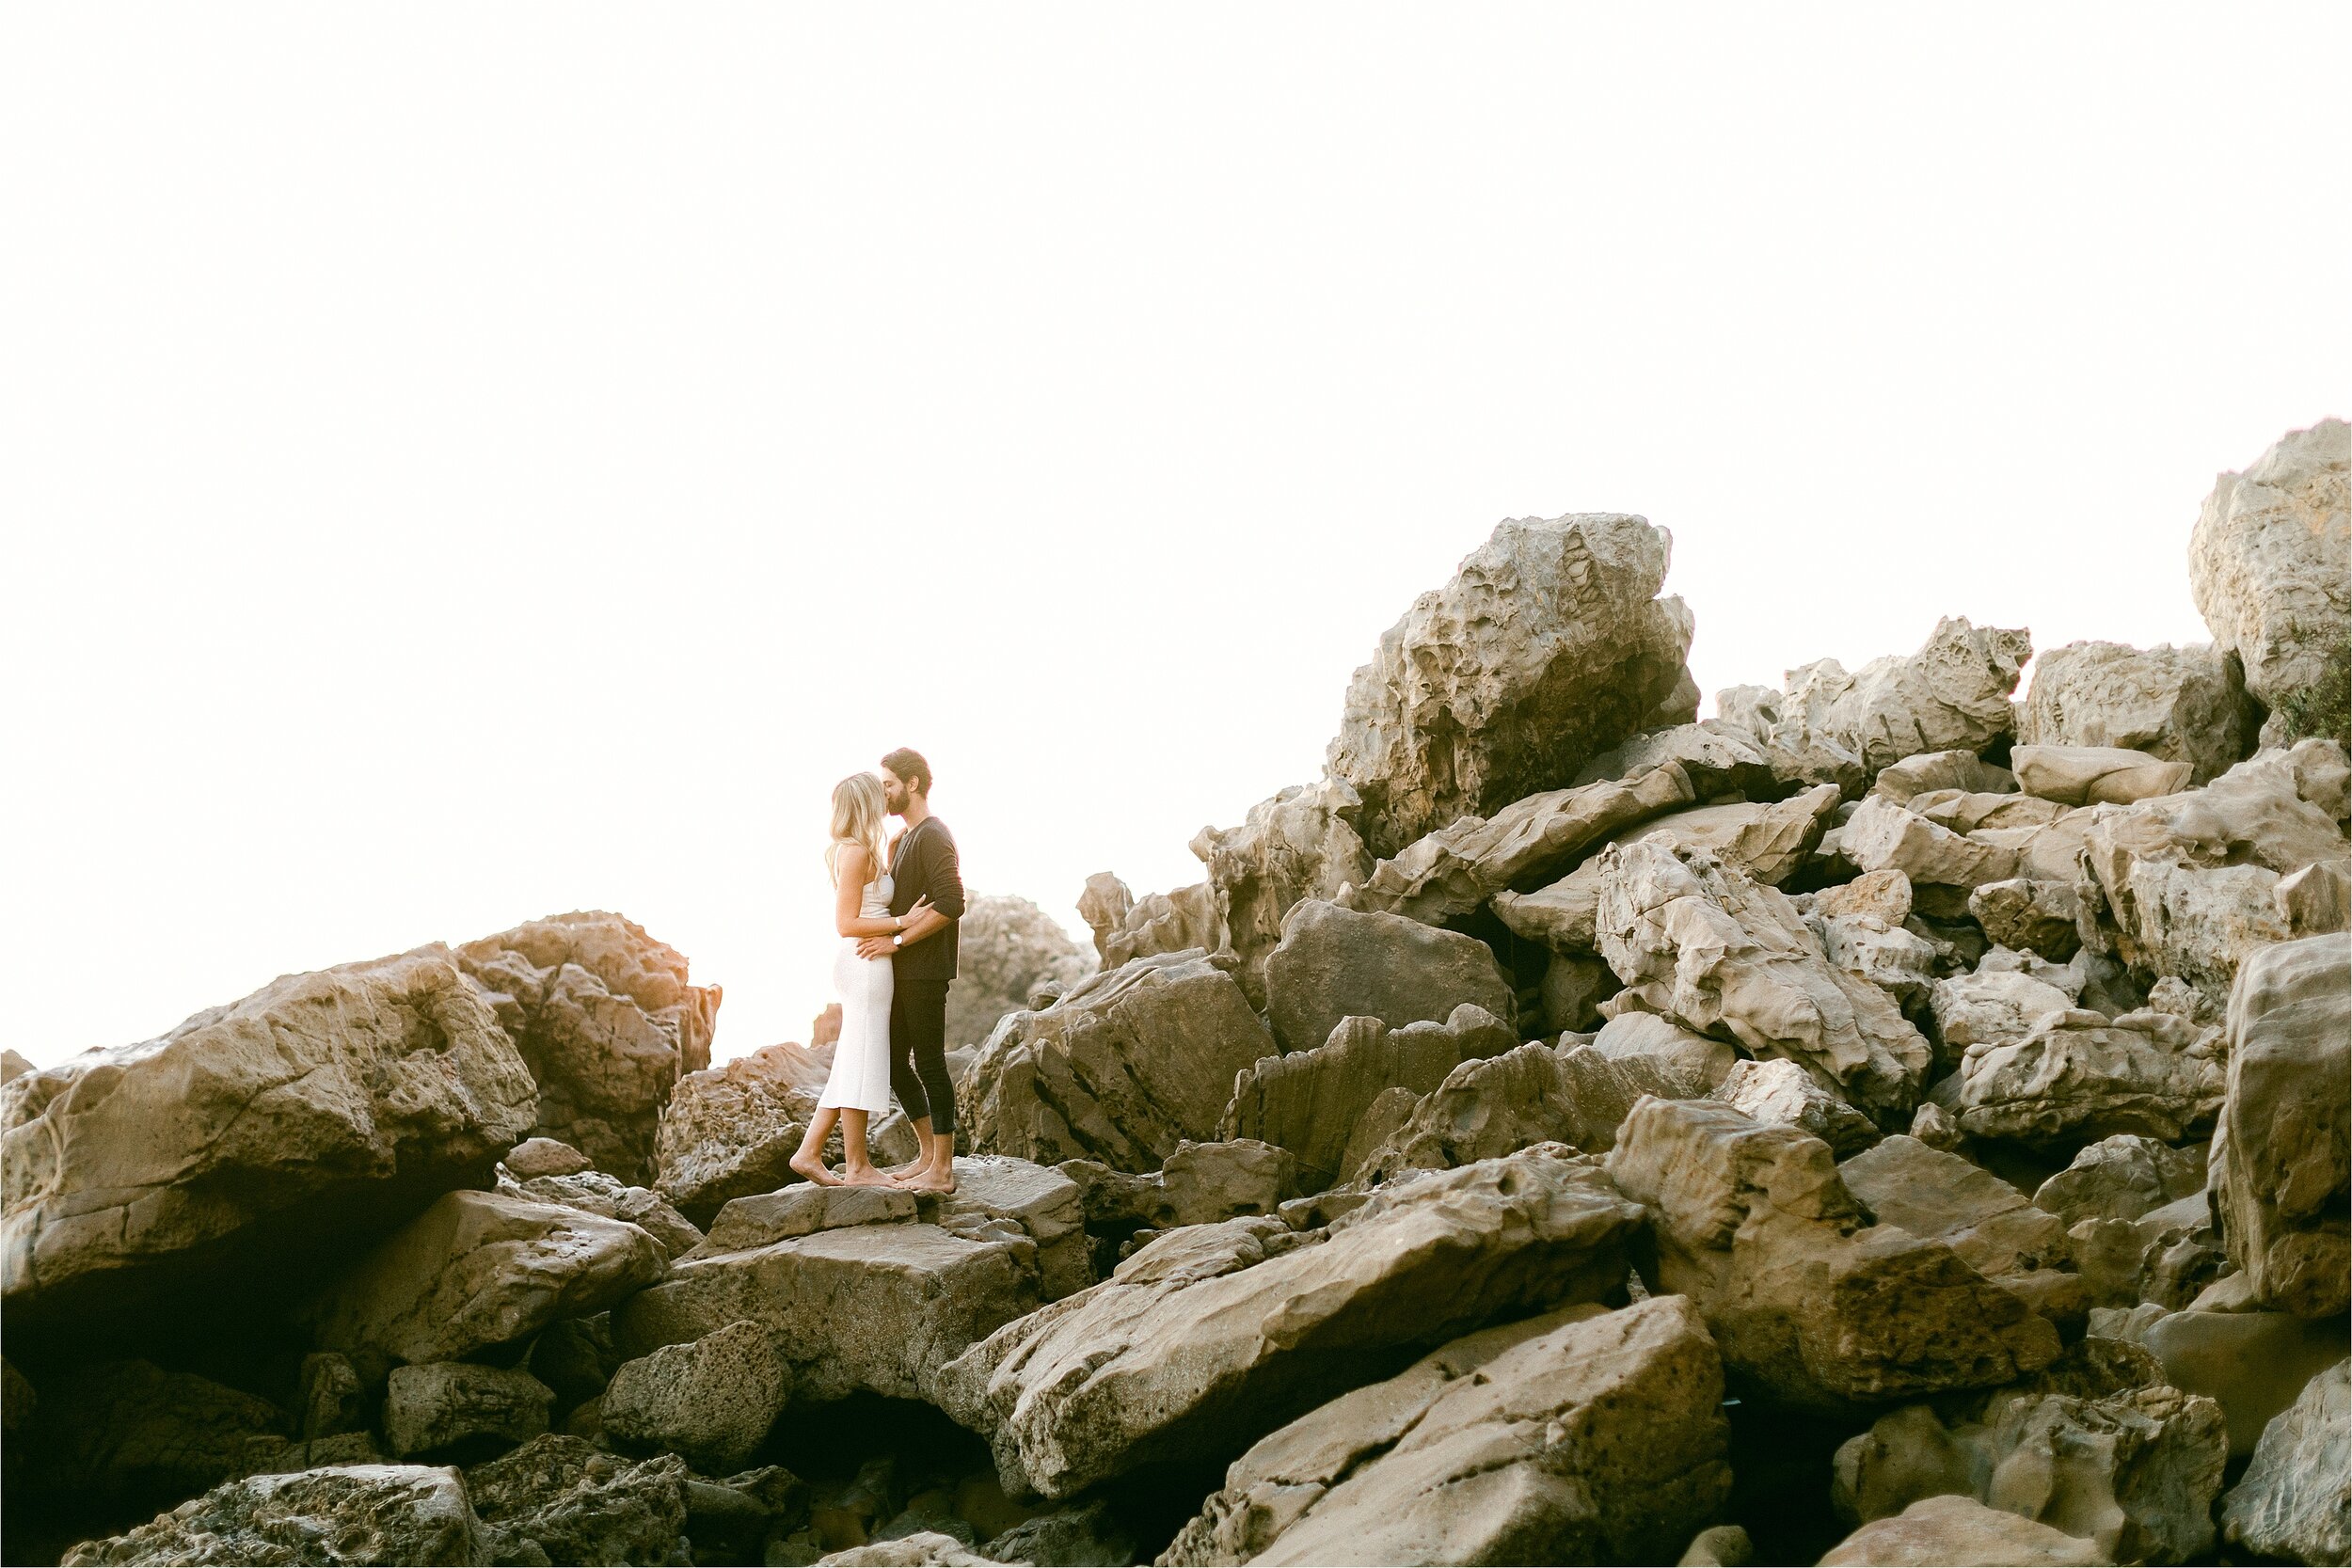 blonde female in white dress kisses her fiance in black jeans and dark tshirt while standing on large rock embankment at the beach